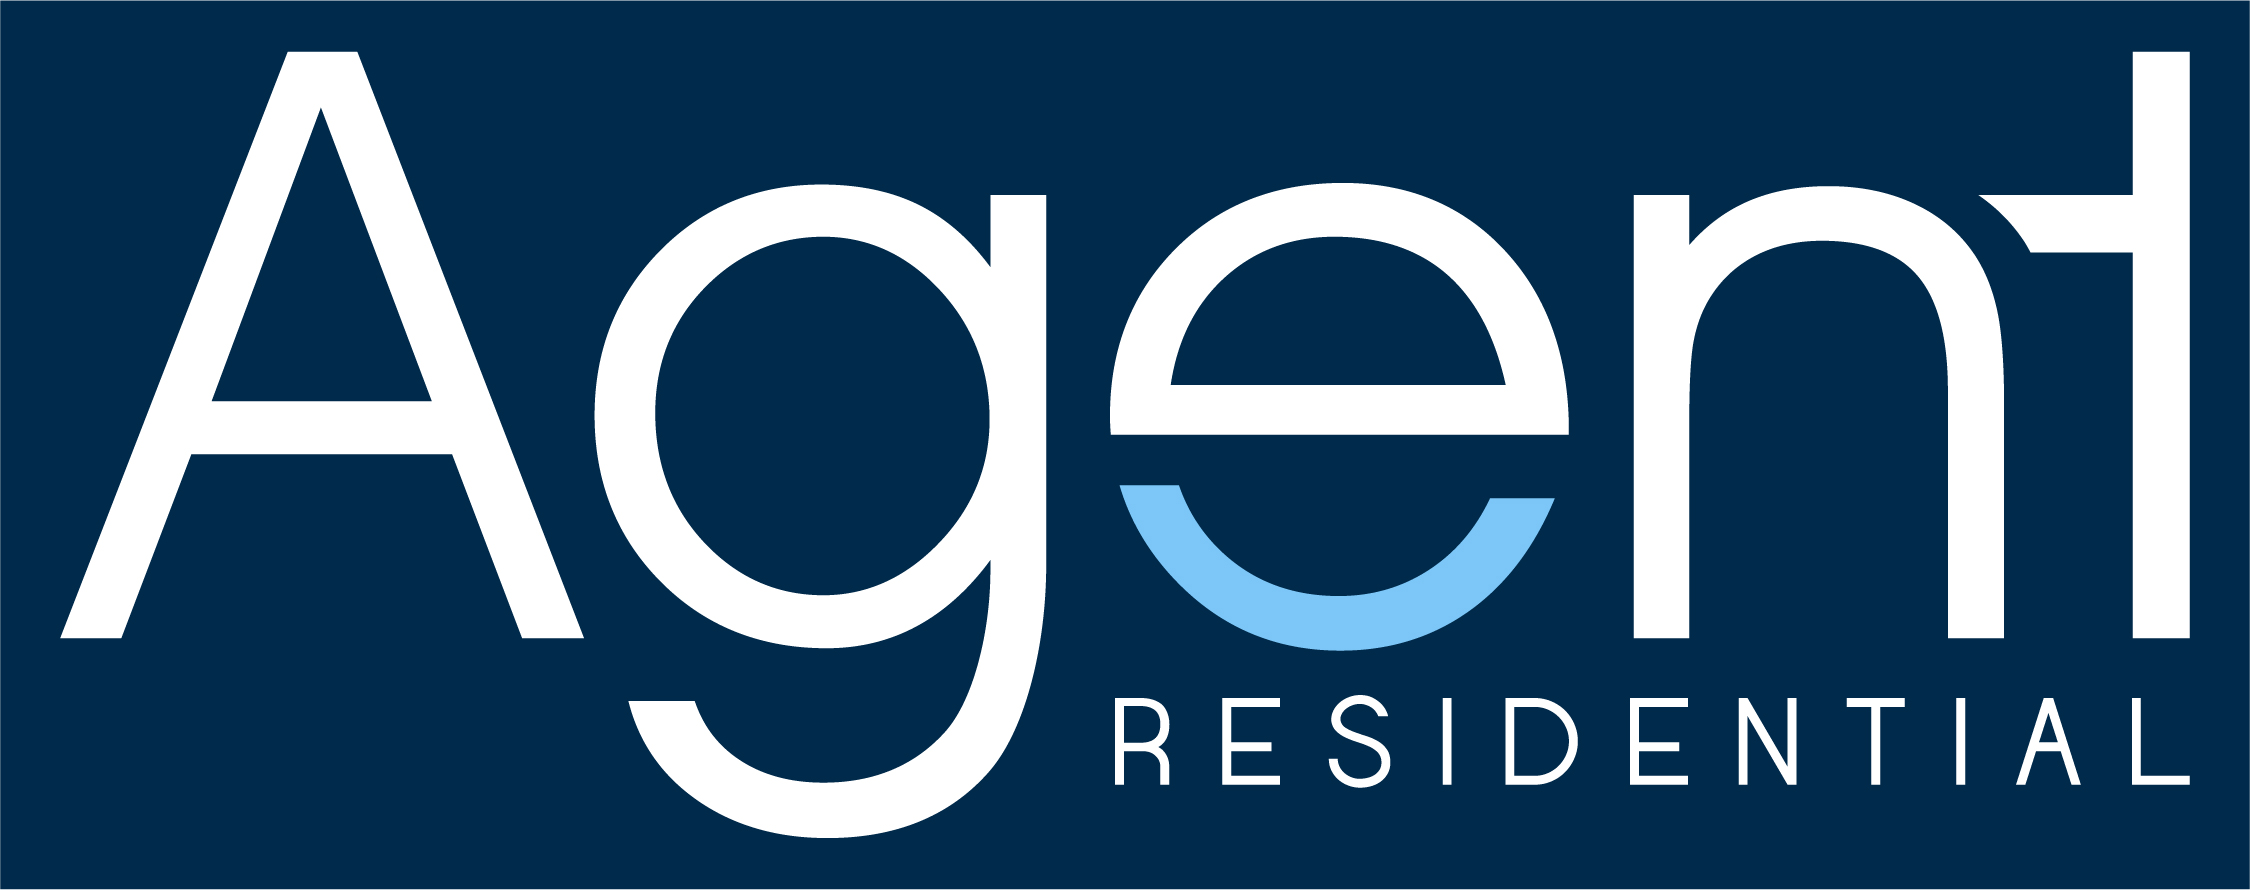 Agent Residential